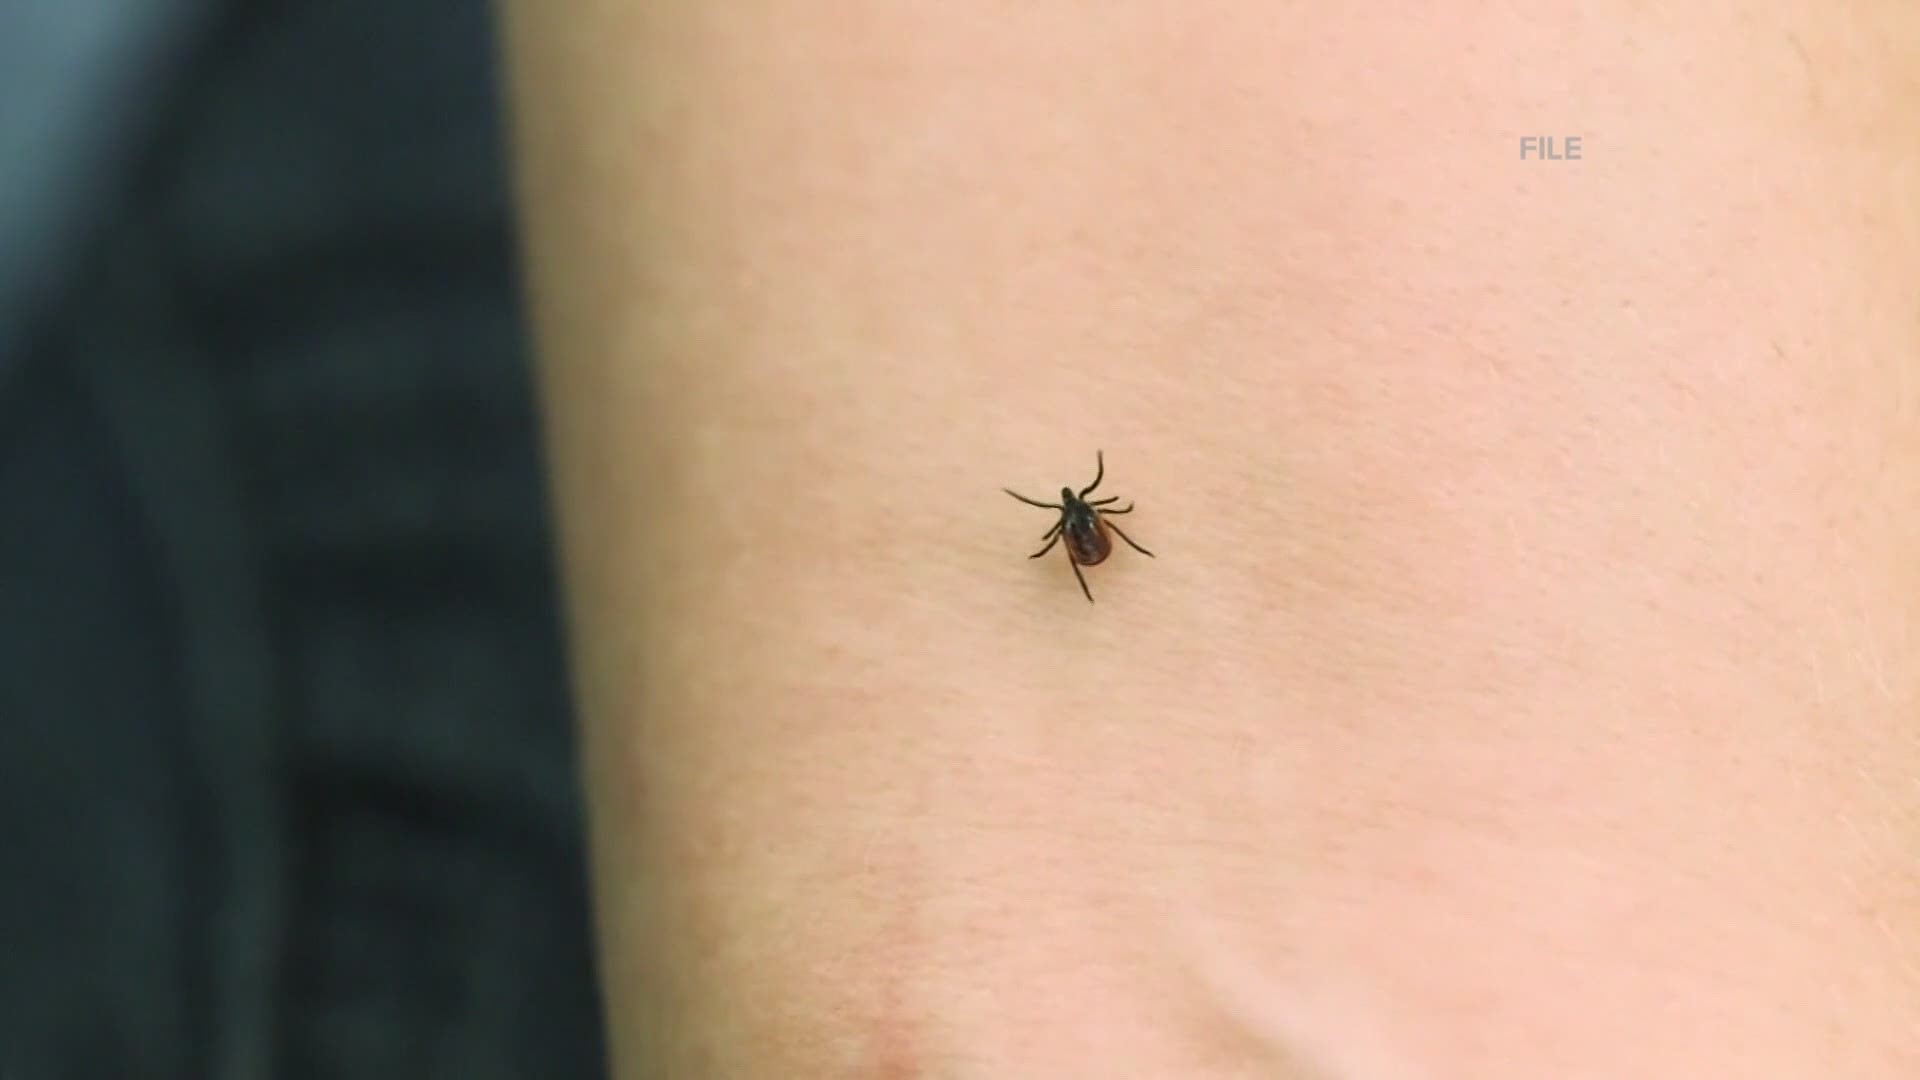 A new study shows that cases of tick-borne illnesses across the country are ten times higher than what experts previously thought.